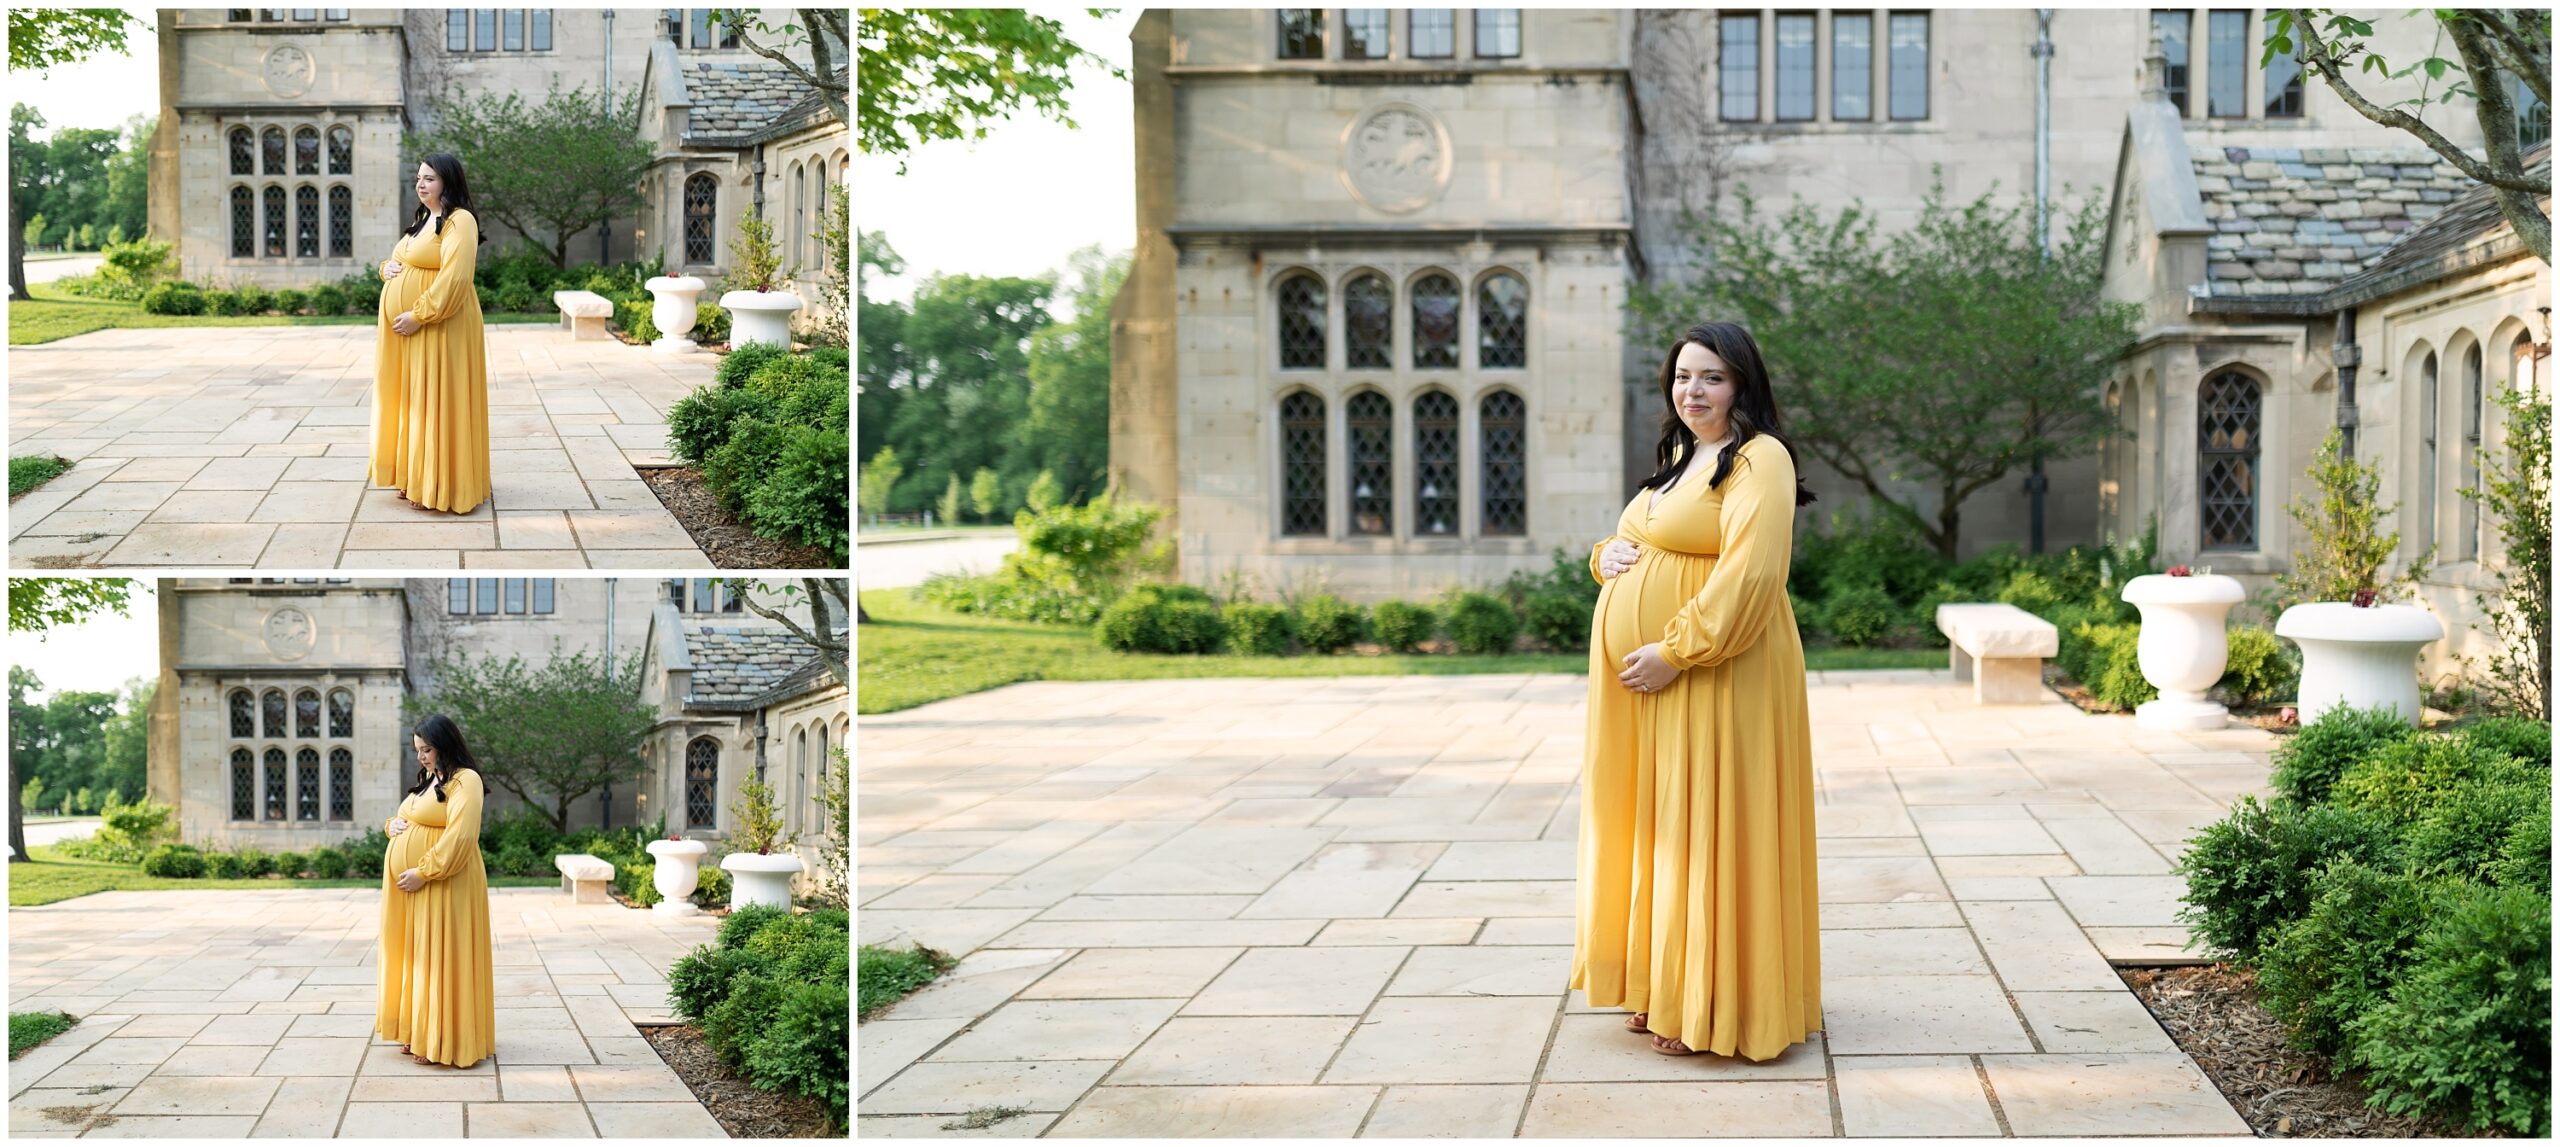 Hartwood Acres Mansion Maternity Session in Pittsburgh PA Photographed by Pittsburgh Maternity Photographer Acevedo Weddings